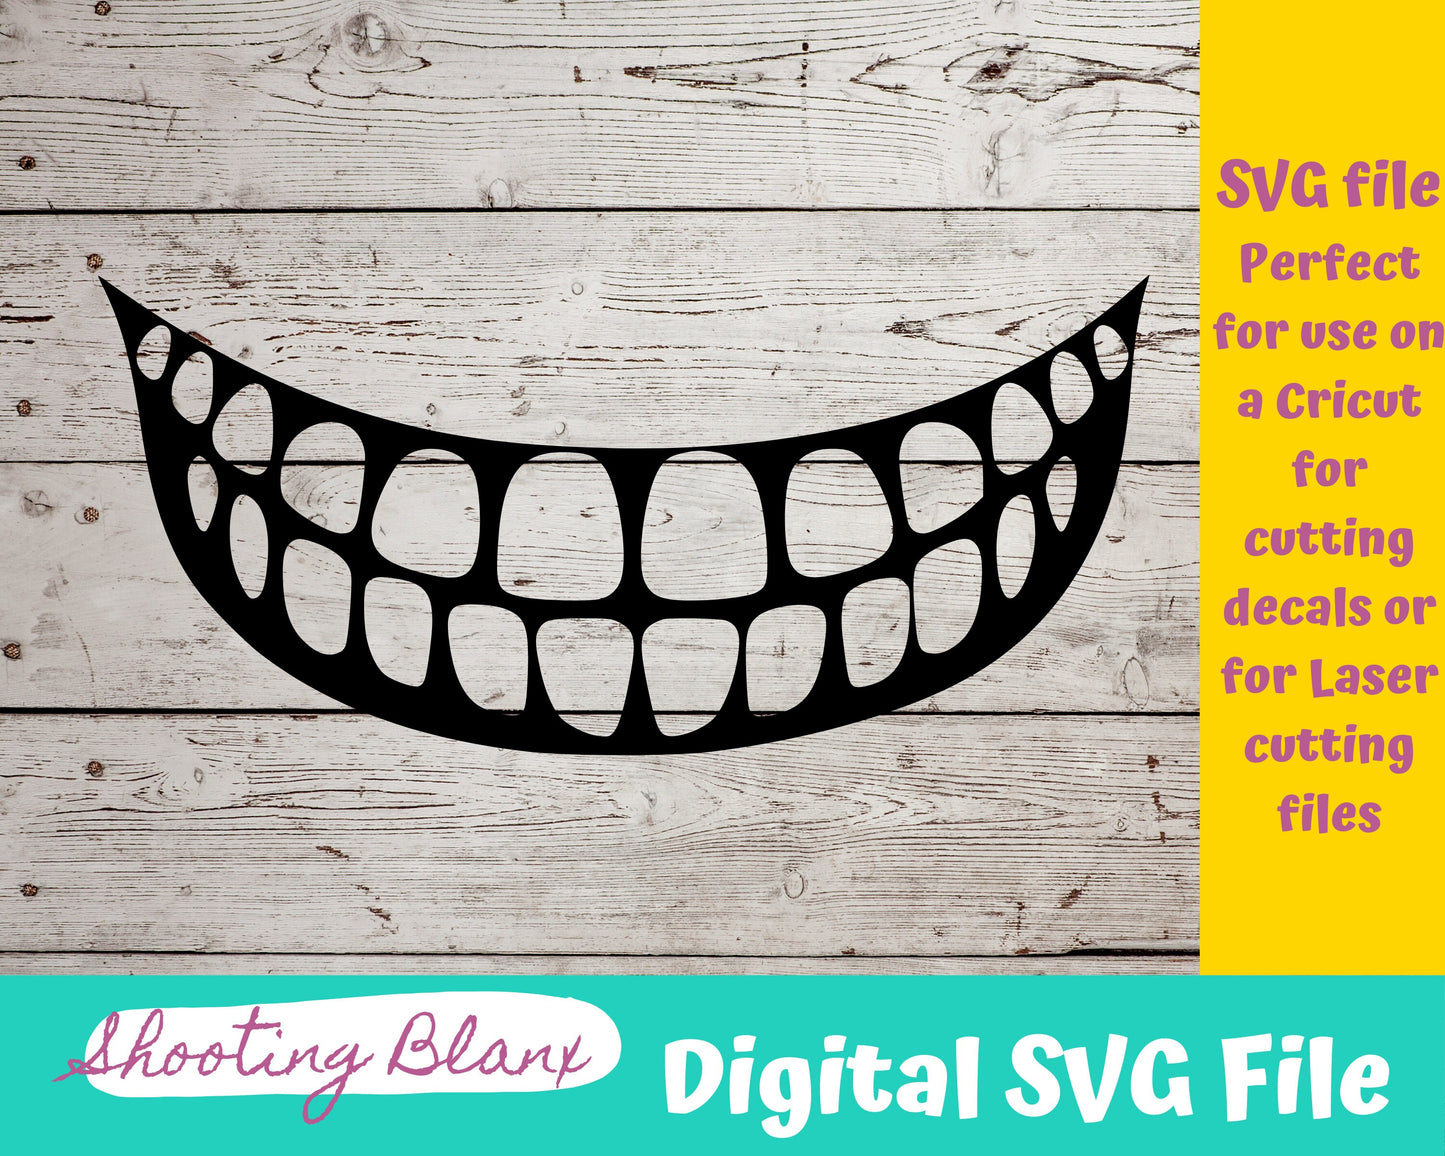 Teeth / Bite bundle SVG files perfect for Cricut, Cameo, or Silhouette also for laser engraving Glowforge, monster, mouth, lips, tooth